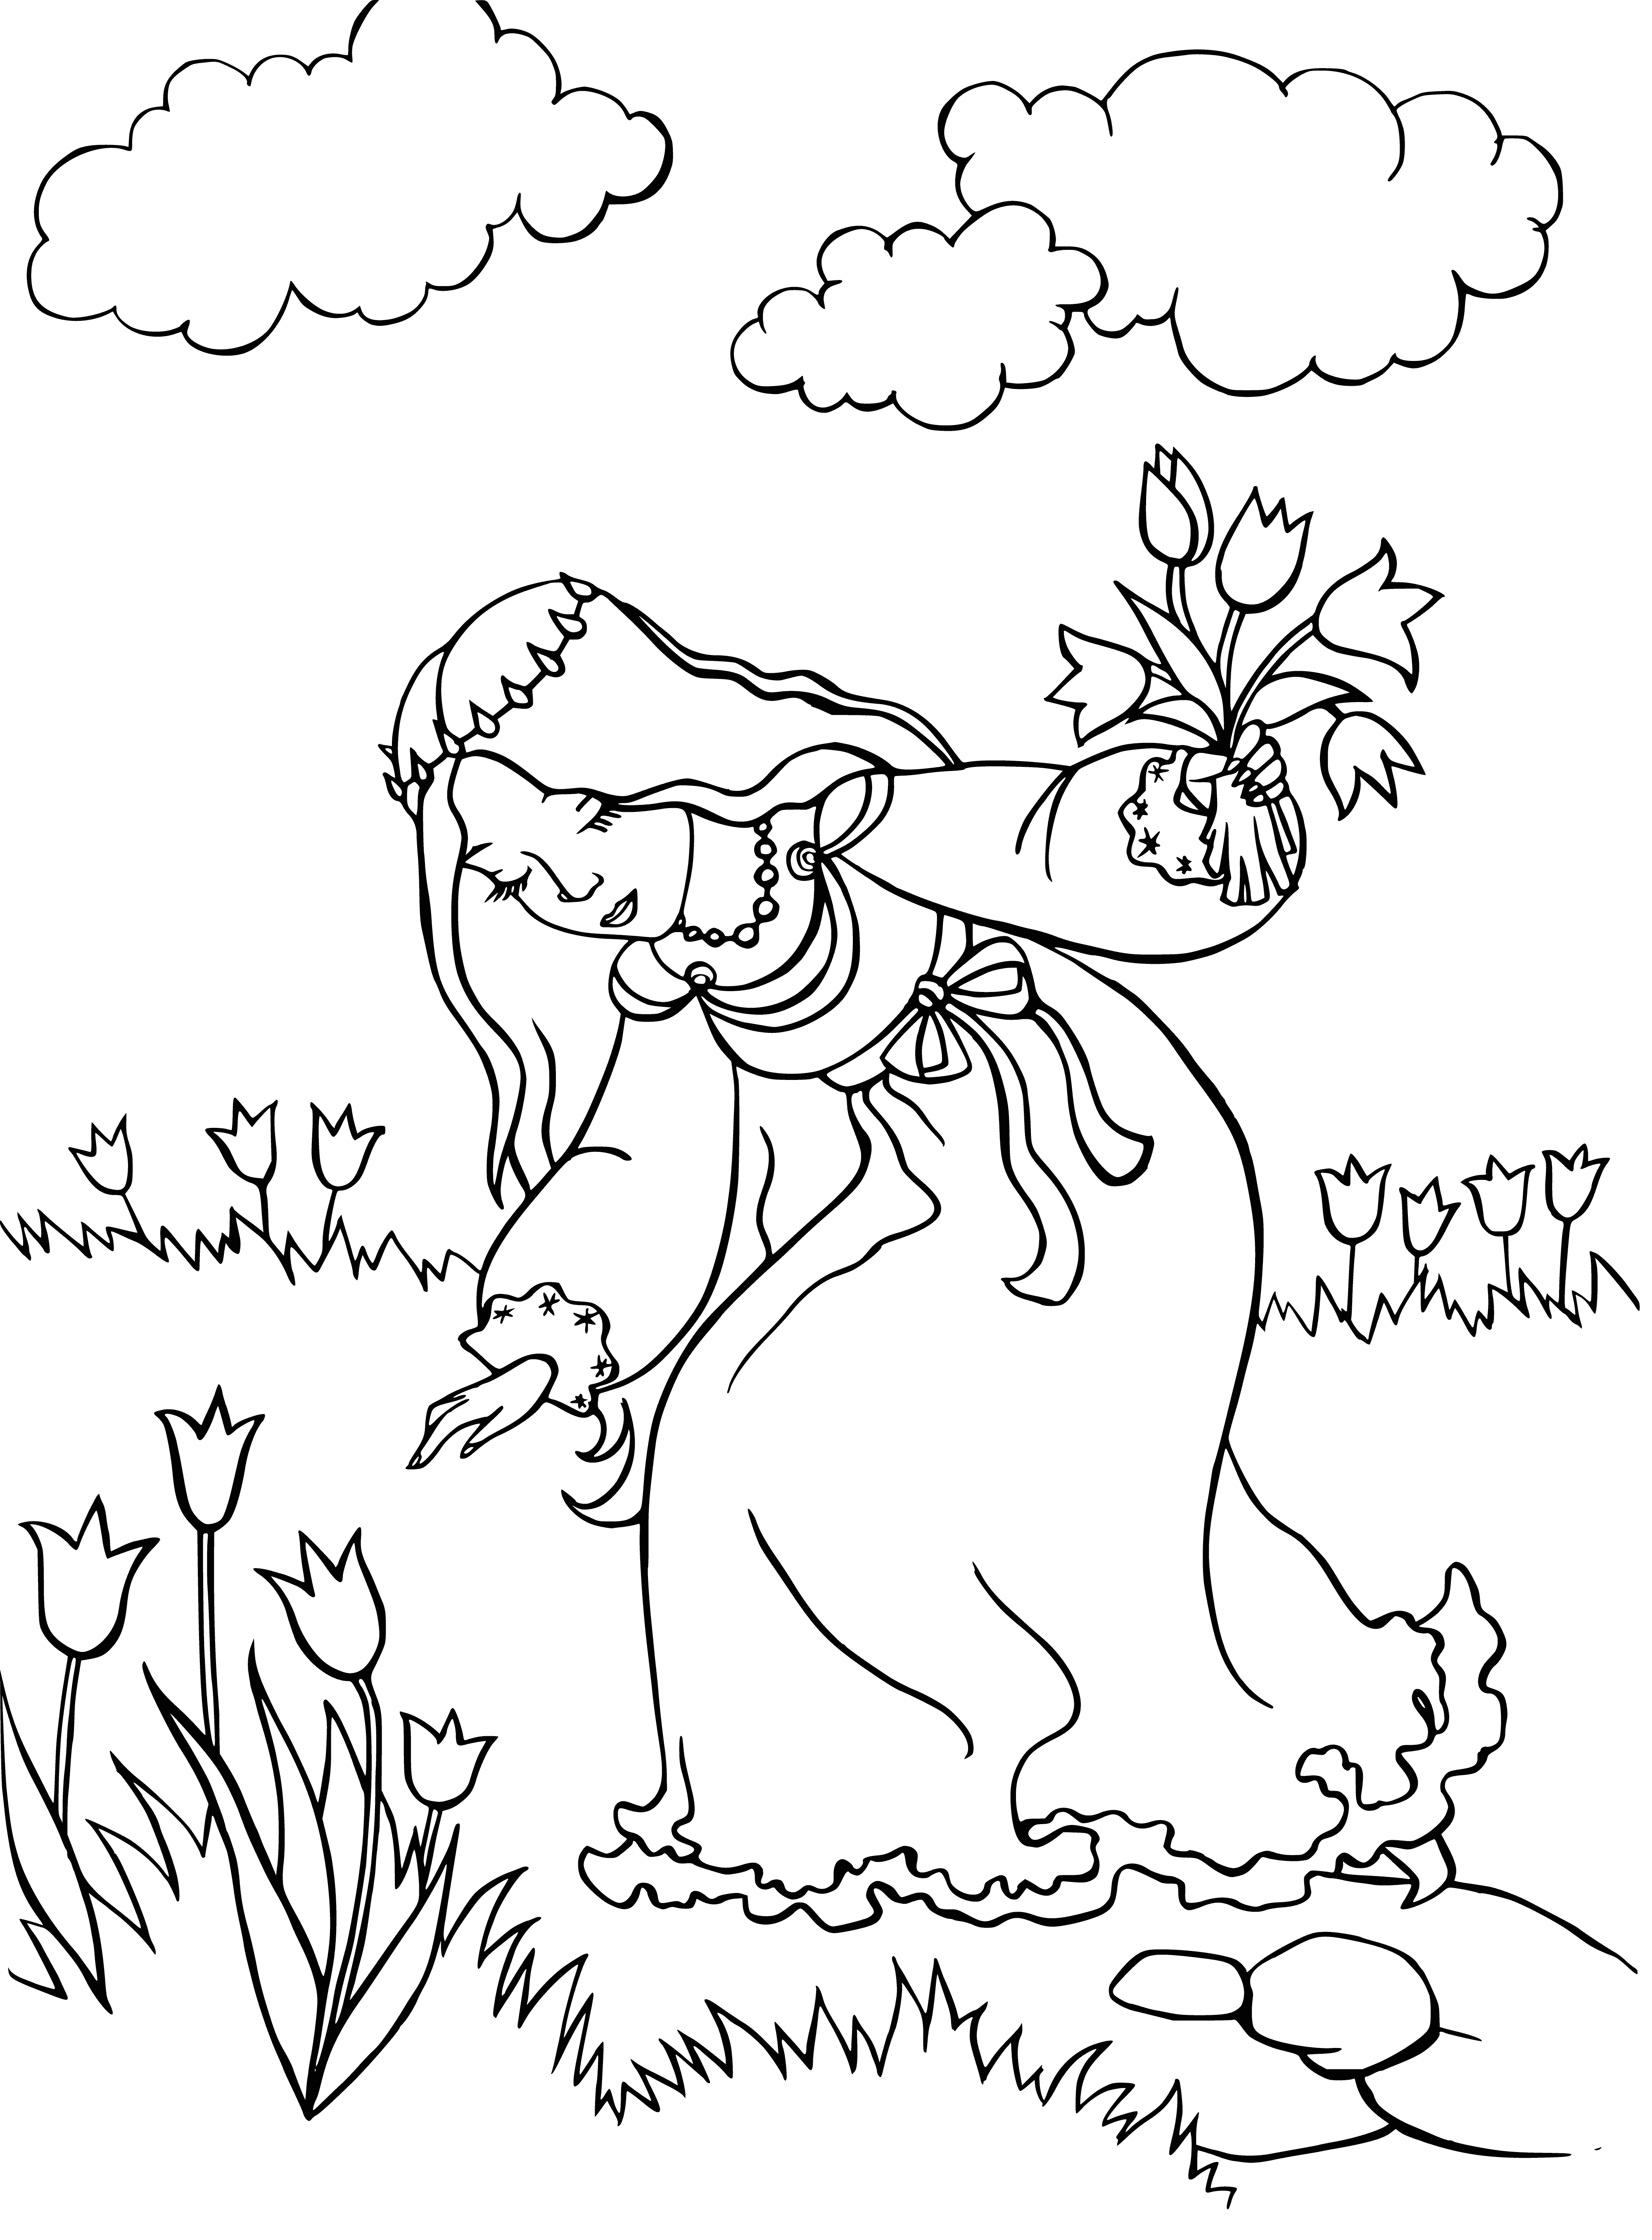 coloring page: A Fairy kingdom ruled by a queen, w/ a princess heir. Surrounded by a forest w/ a path lined w/ trees & flowers; also has houses & castles.